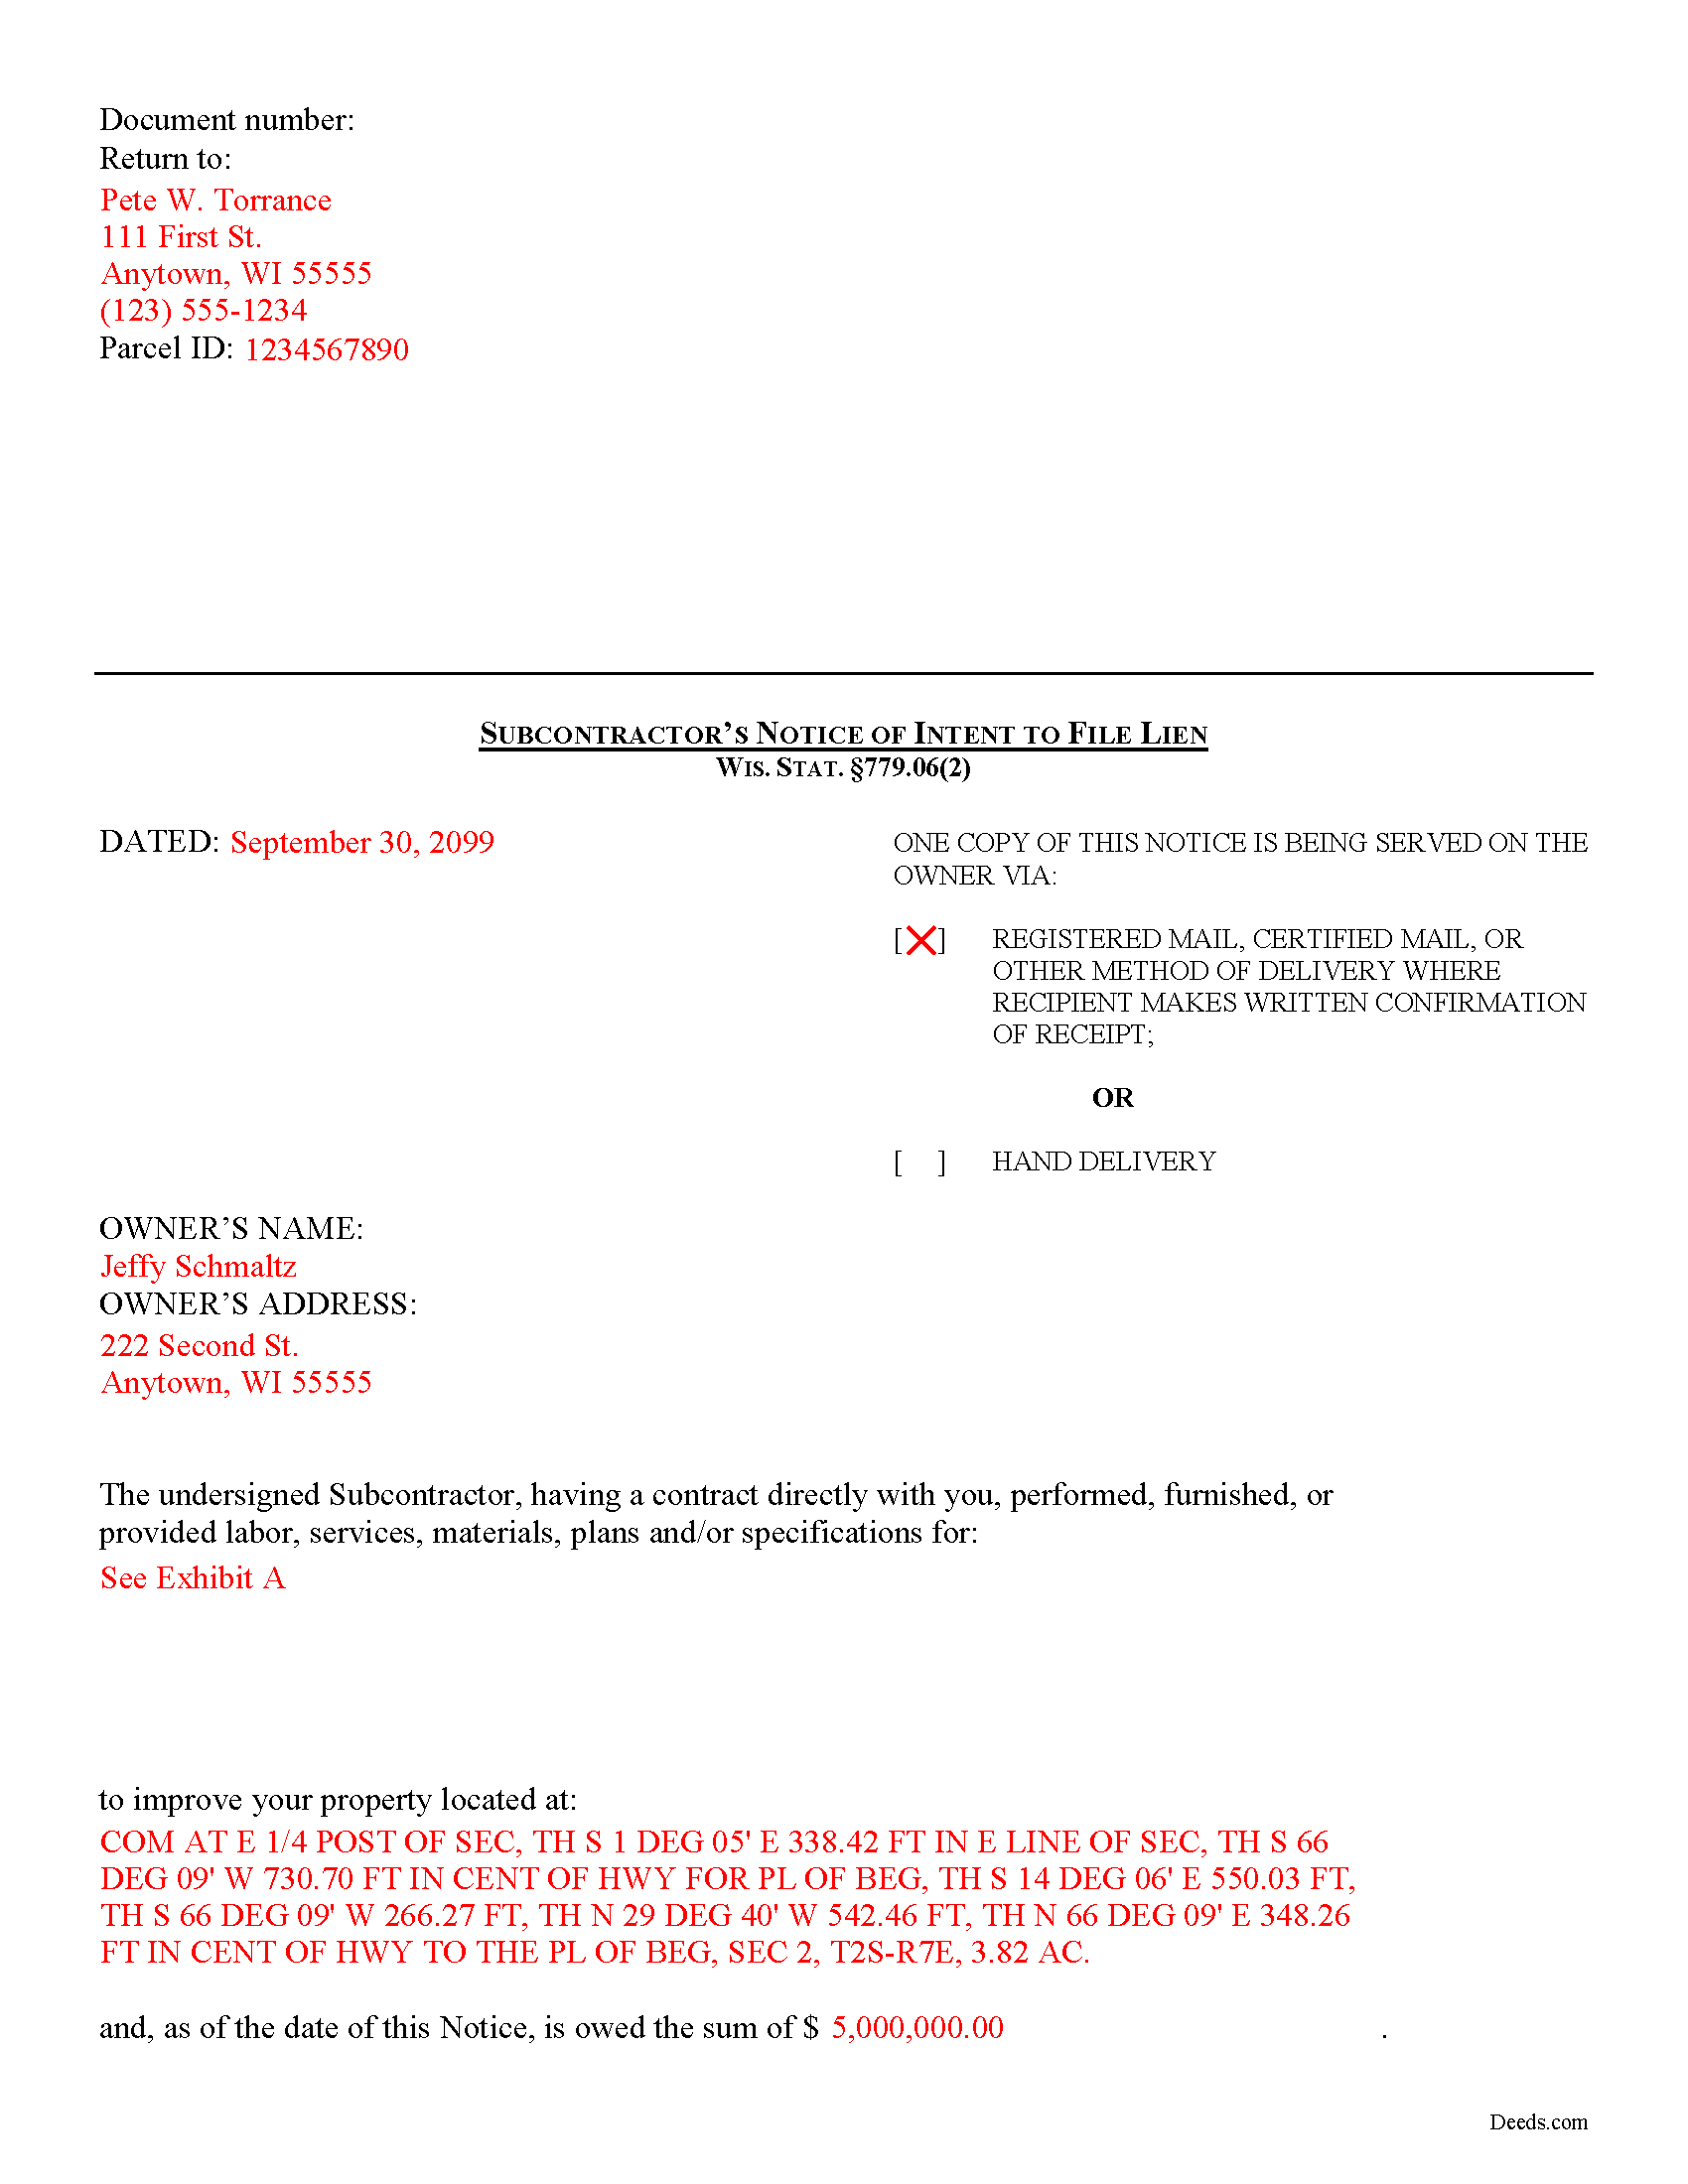 Completed Example of the Subcontractor Notice of Intent to File Lien Document